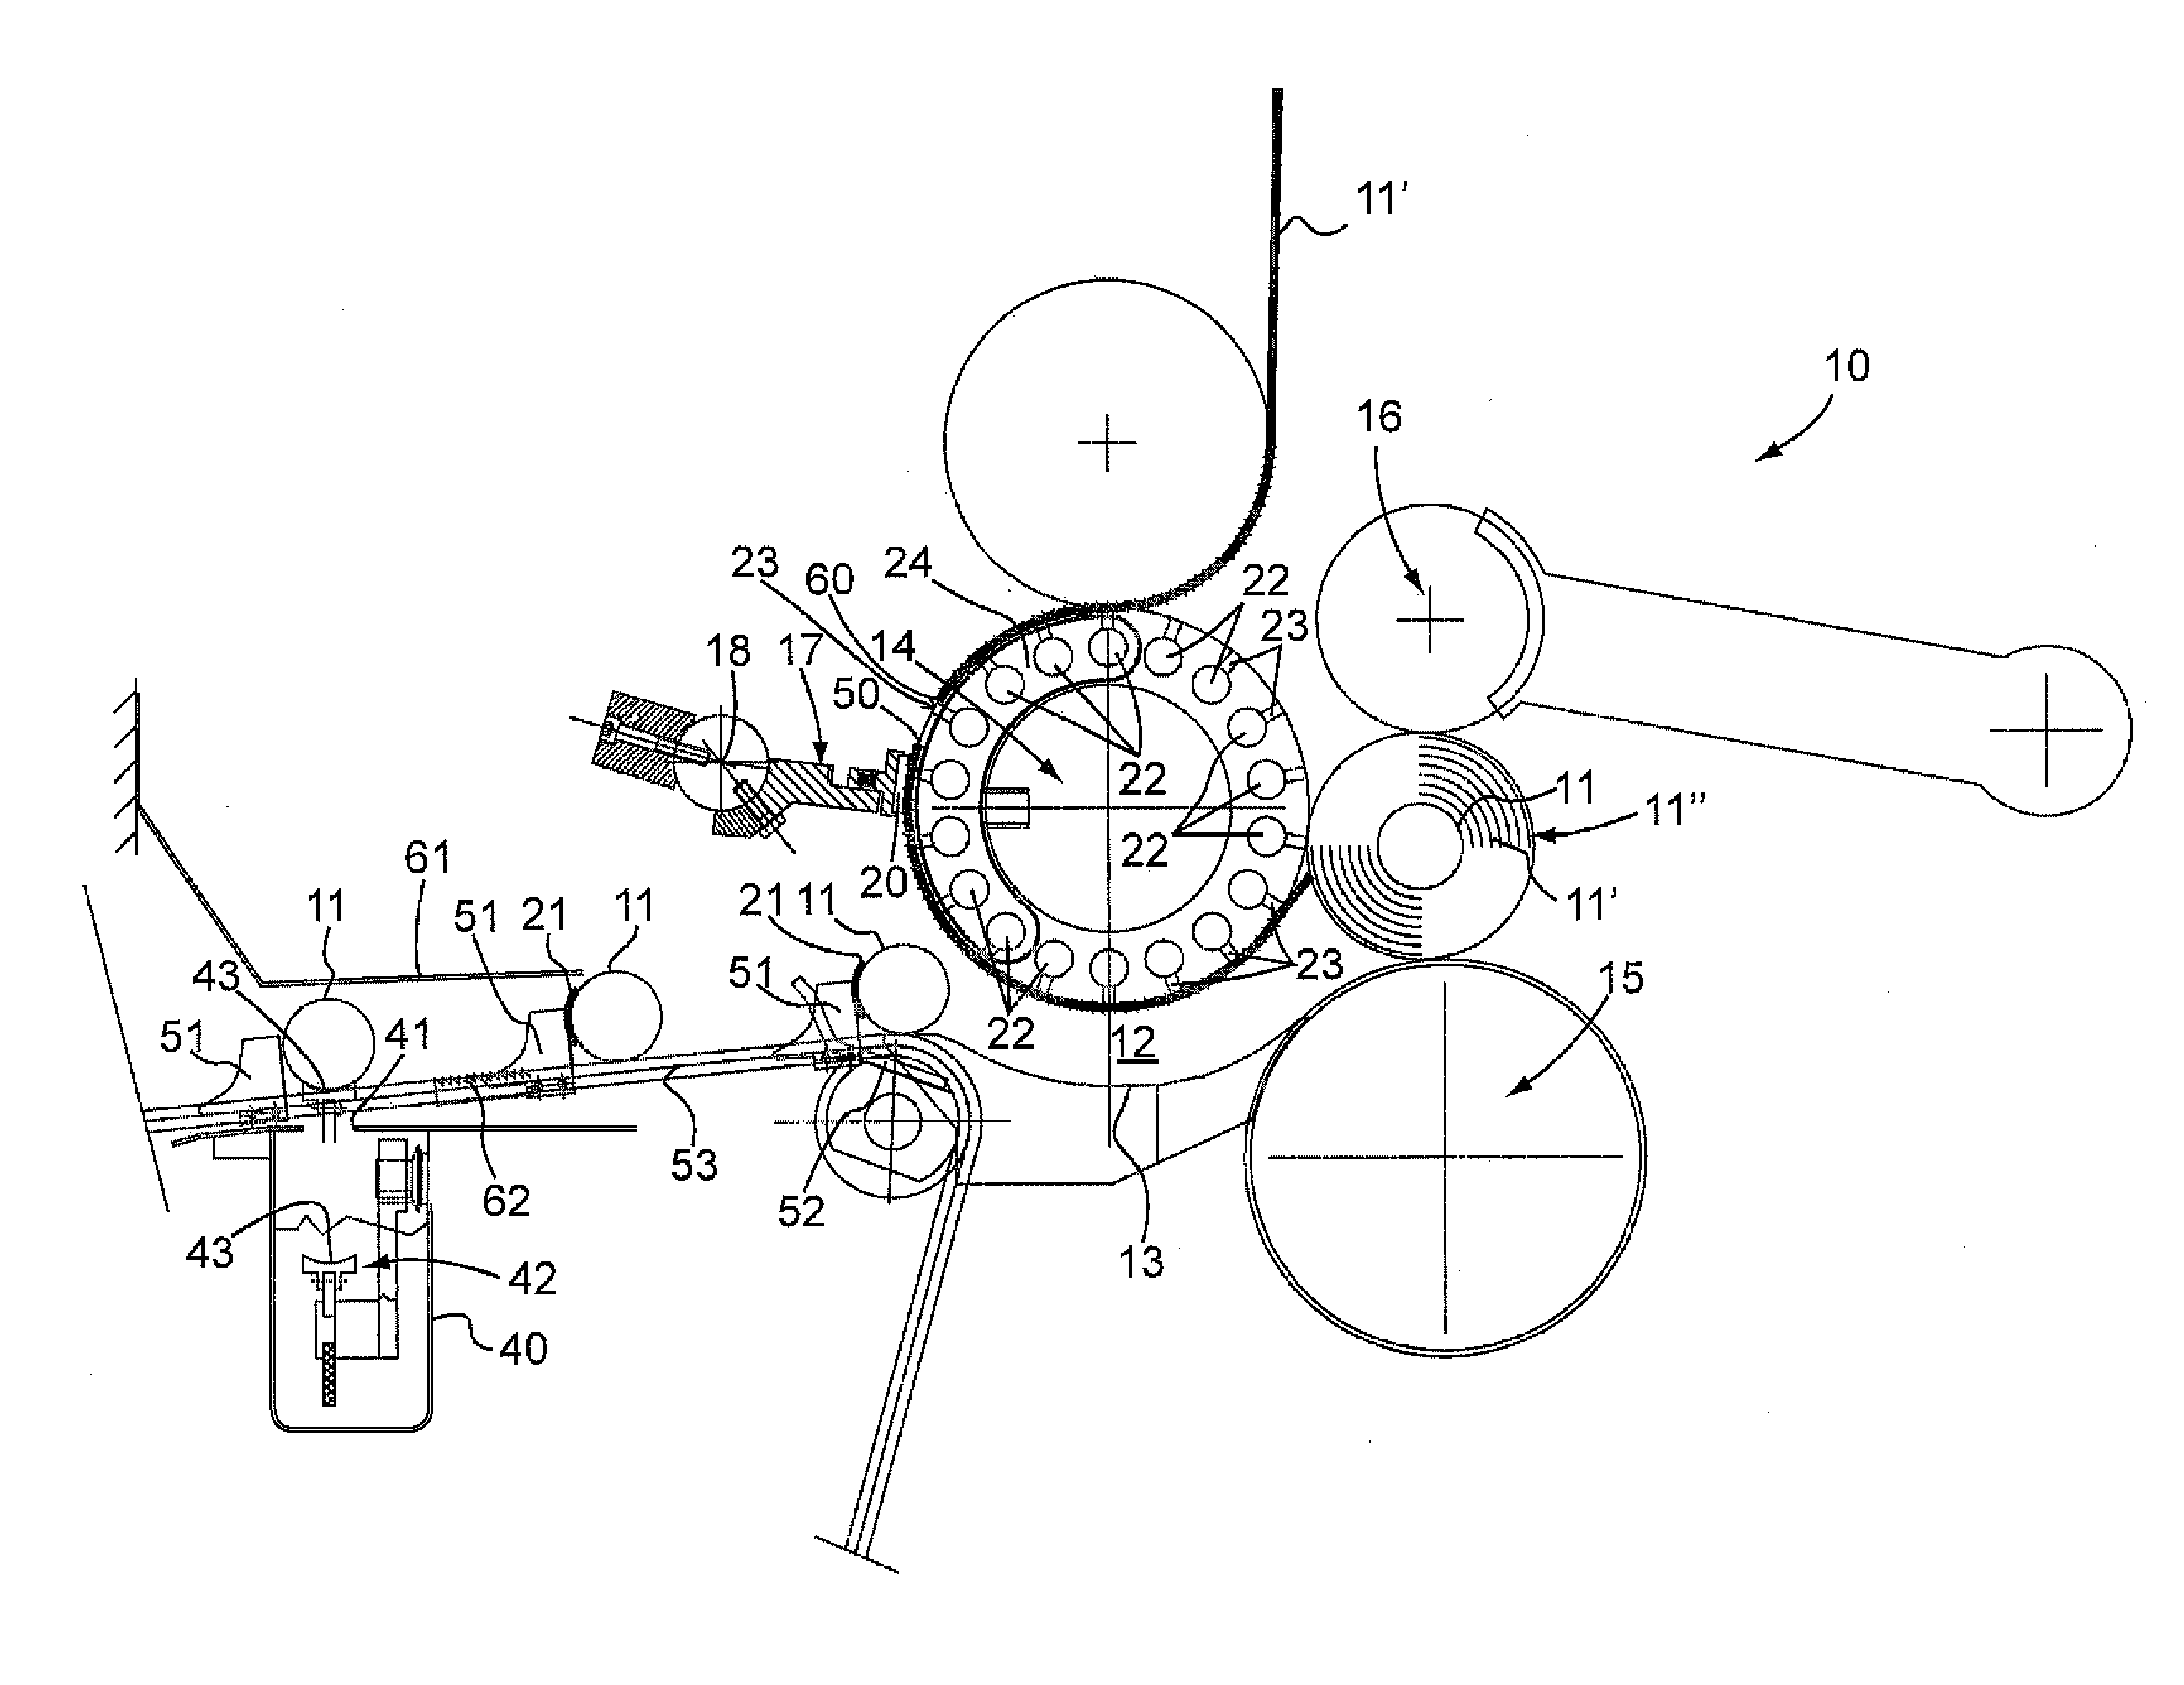 Winding group and method for winding paper around a core to make a log